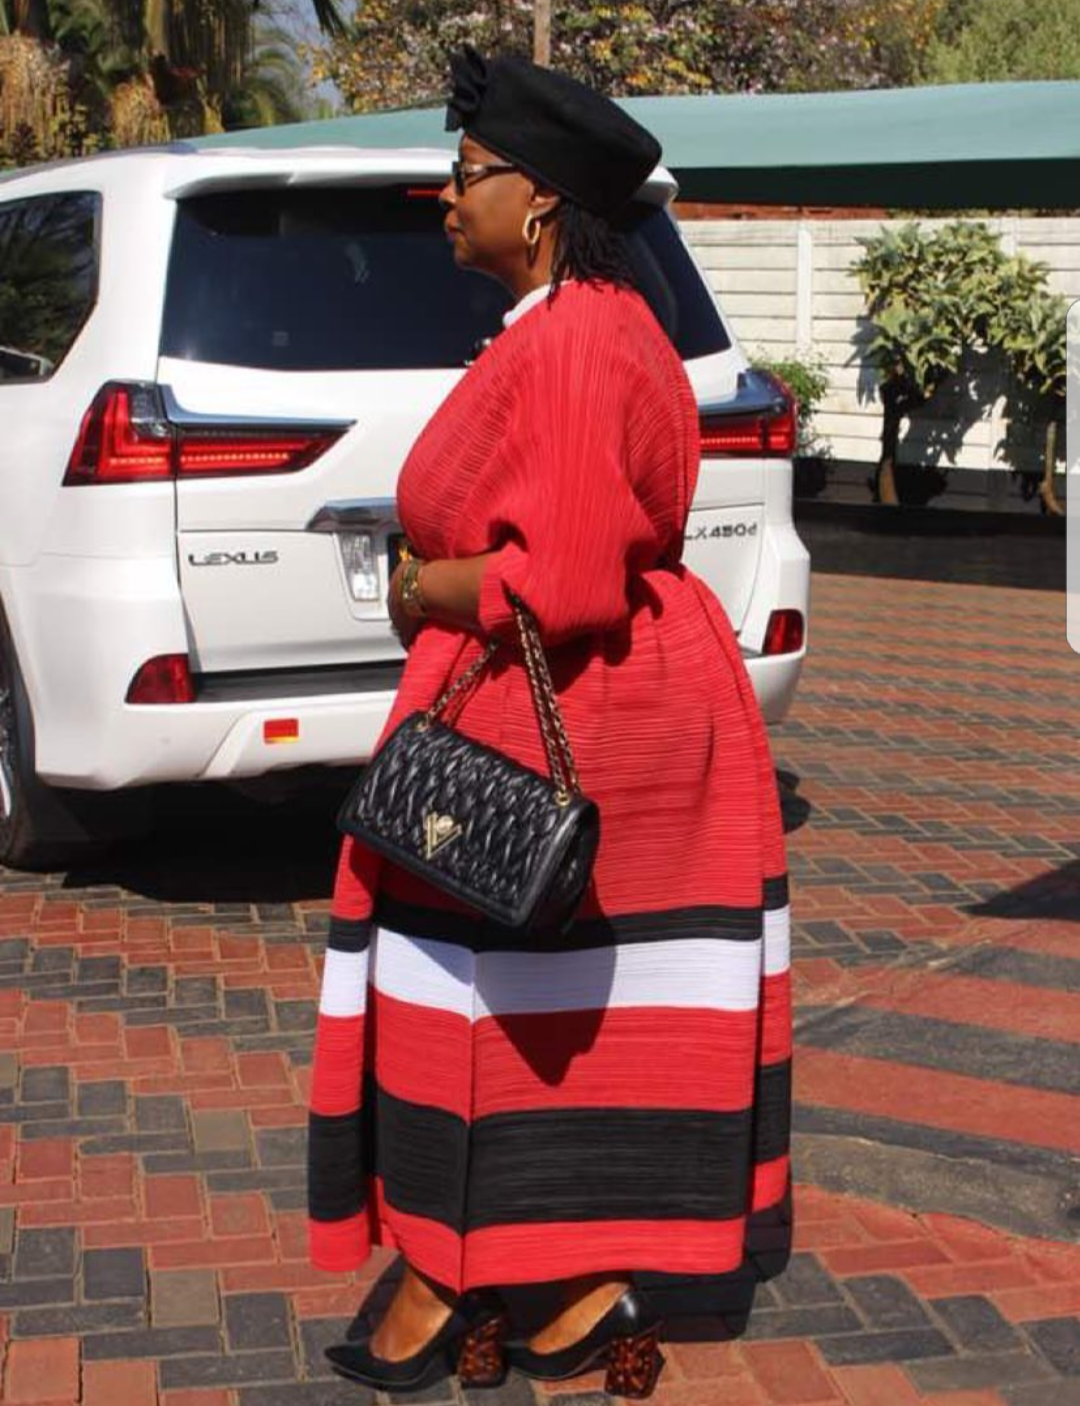 Marvelous Marvellous and Pokello’s Mother In a Nasty Fallout!